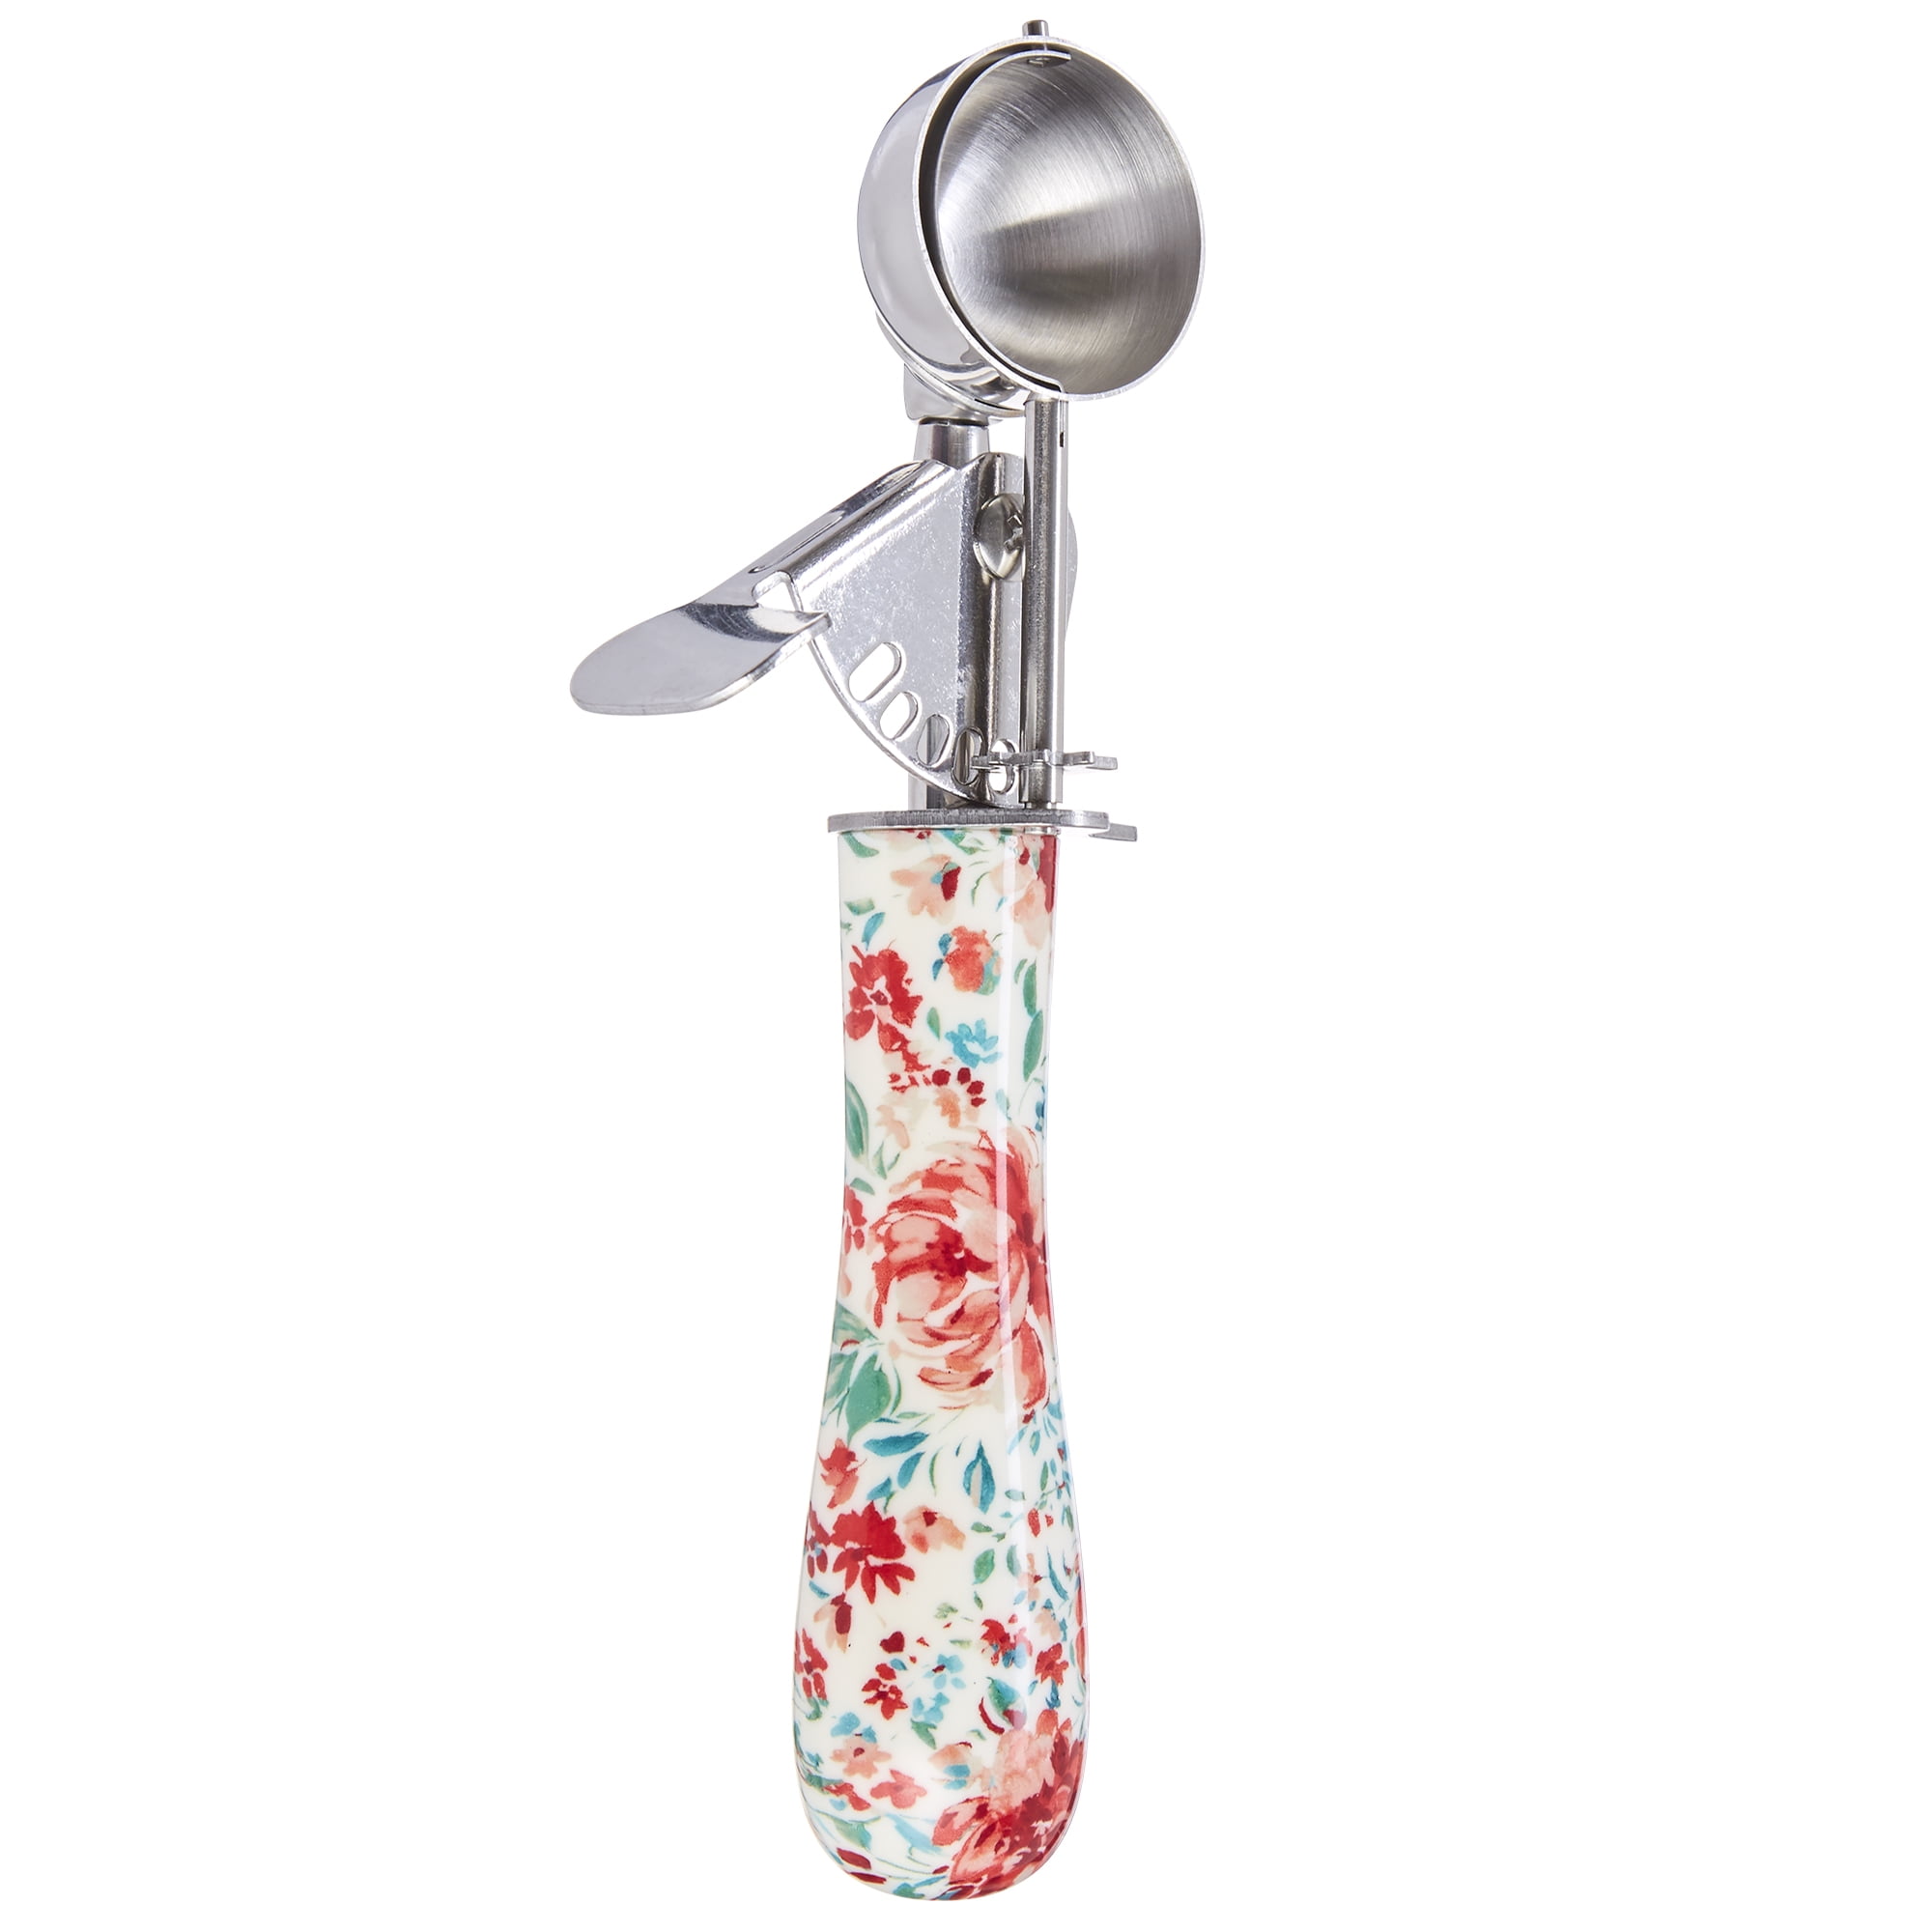 The Pioneer Woman Floral & Stainless Steel Cookie Dropper - Each